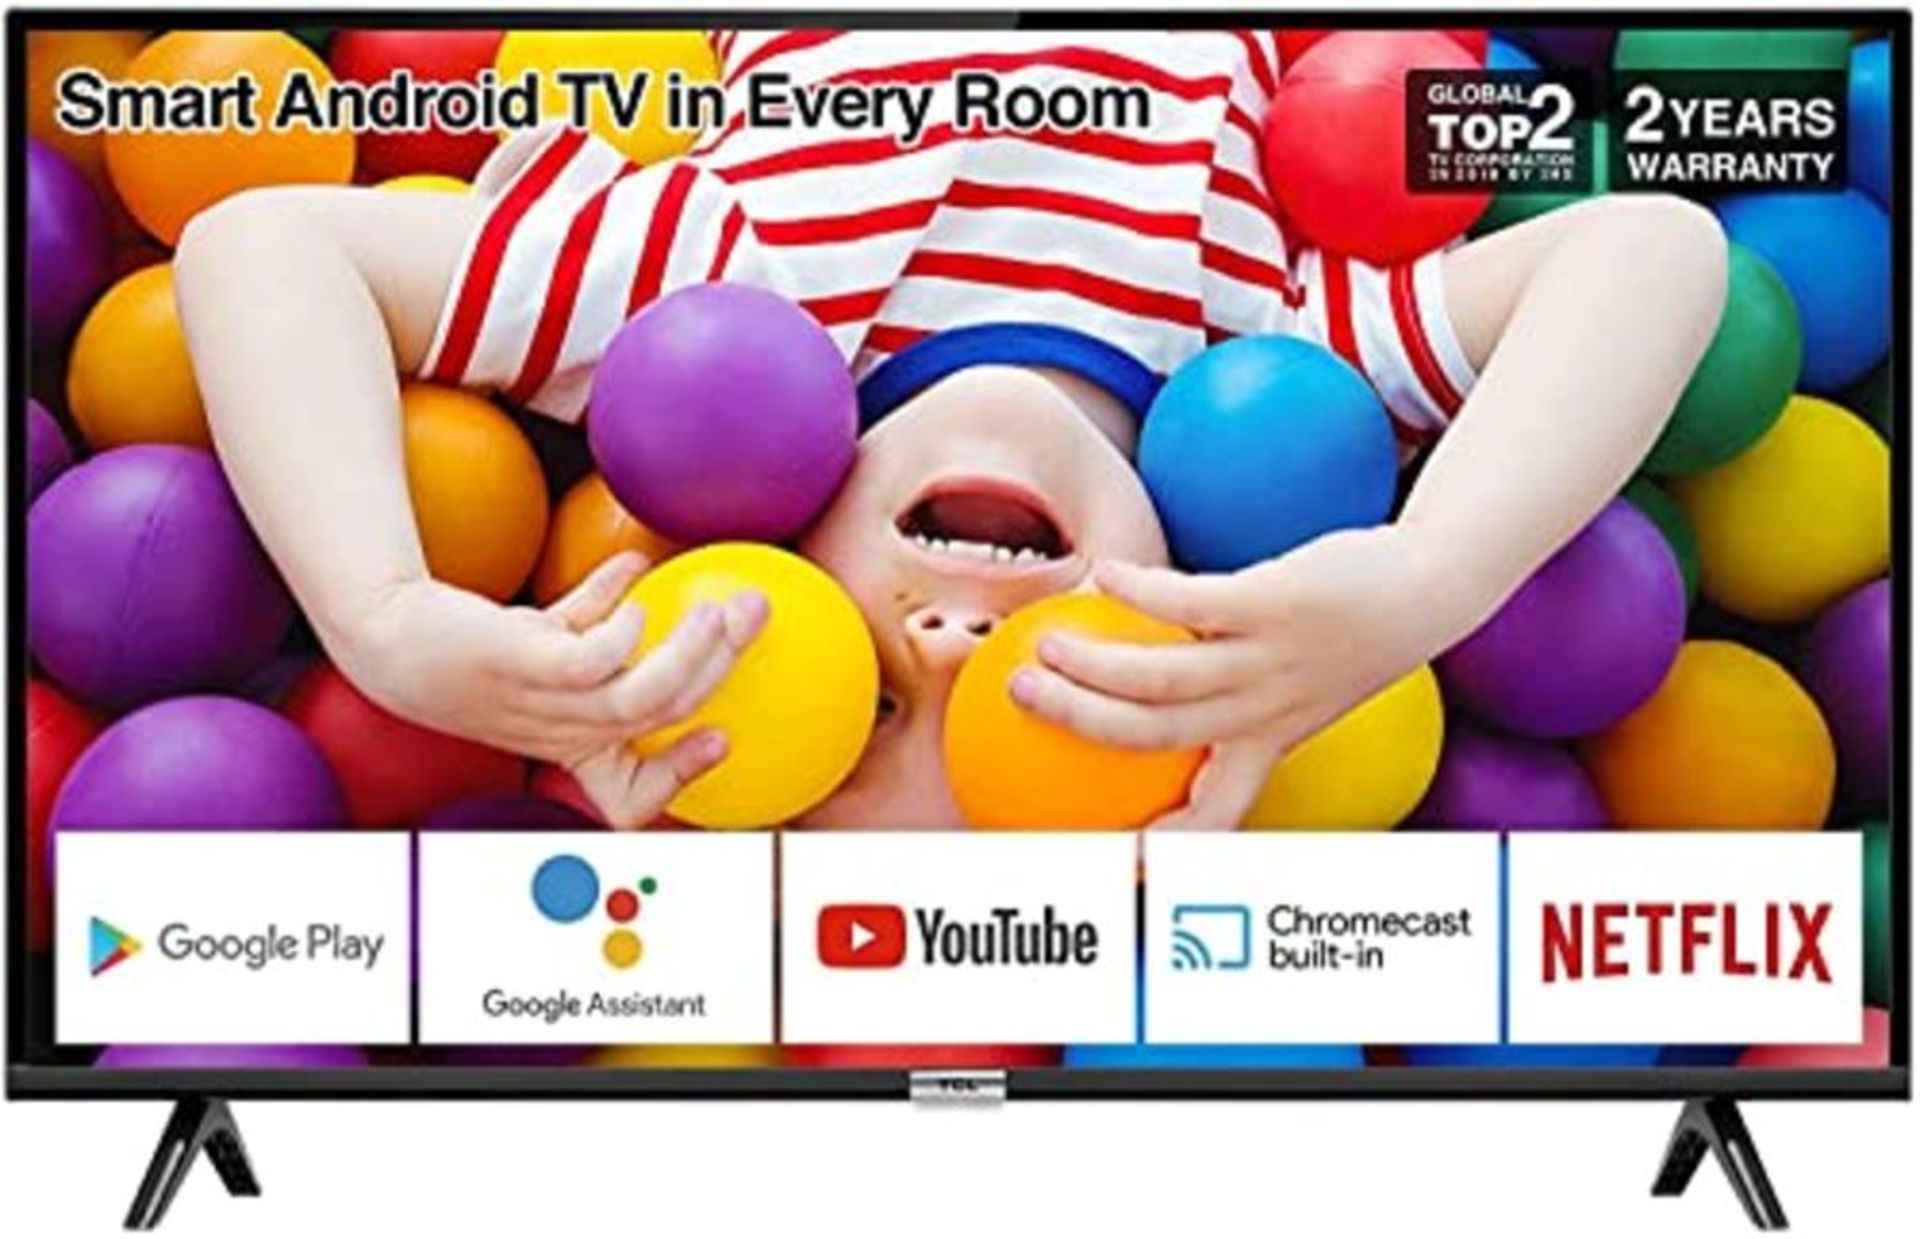 RRP £183.00 TCL 32P500K 32-Inch LED Smart Android TV HD, HDR, Micro Dimming, Netflix, YouTube, DVB